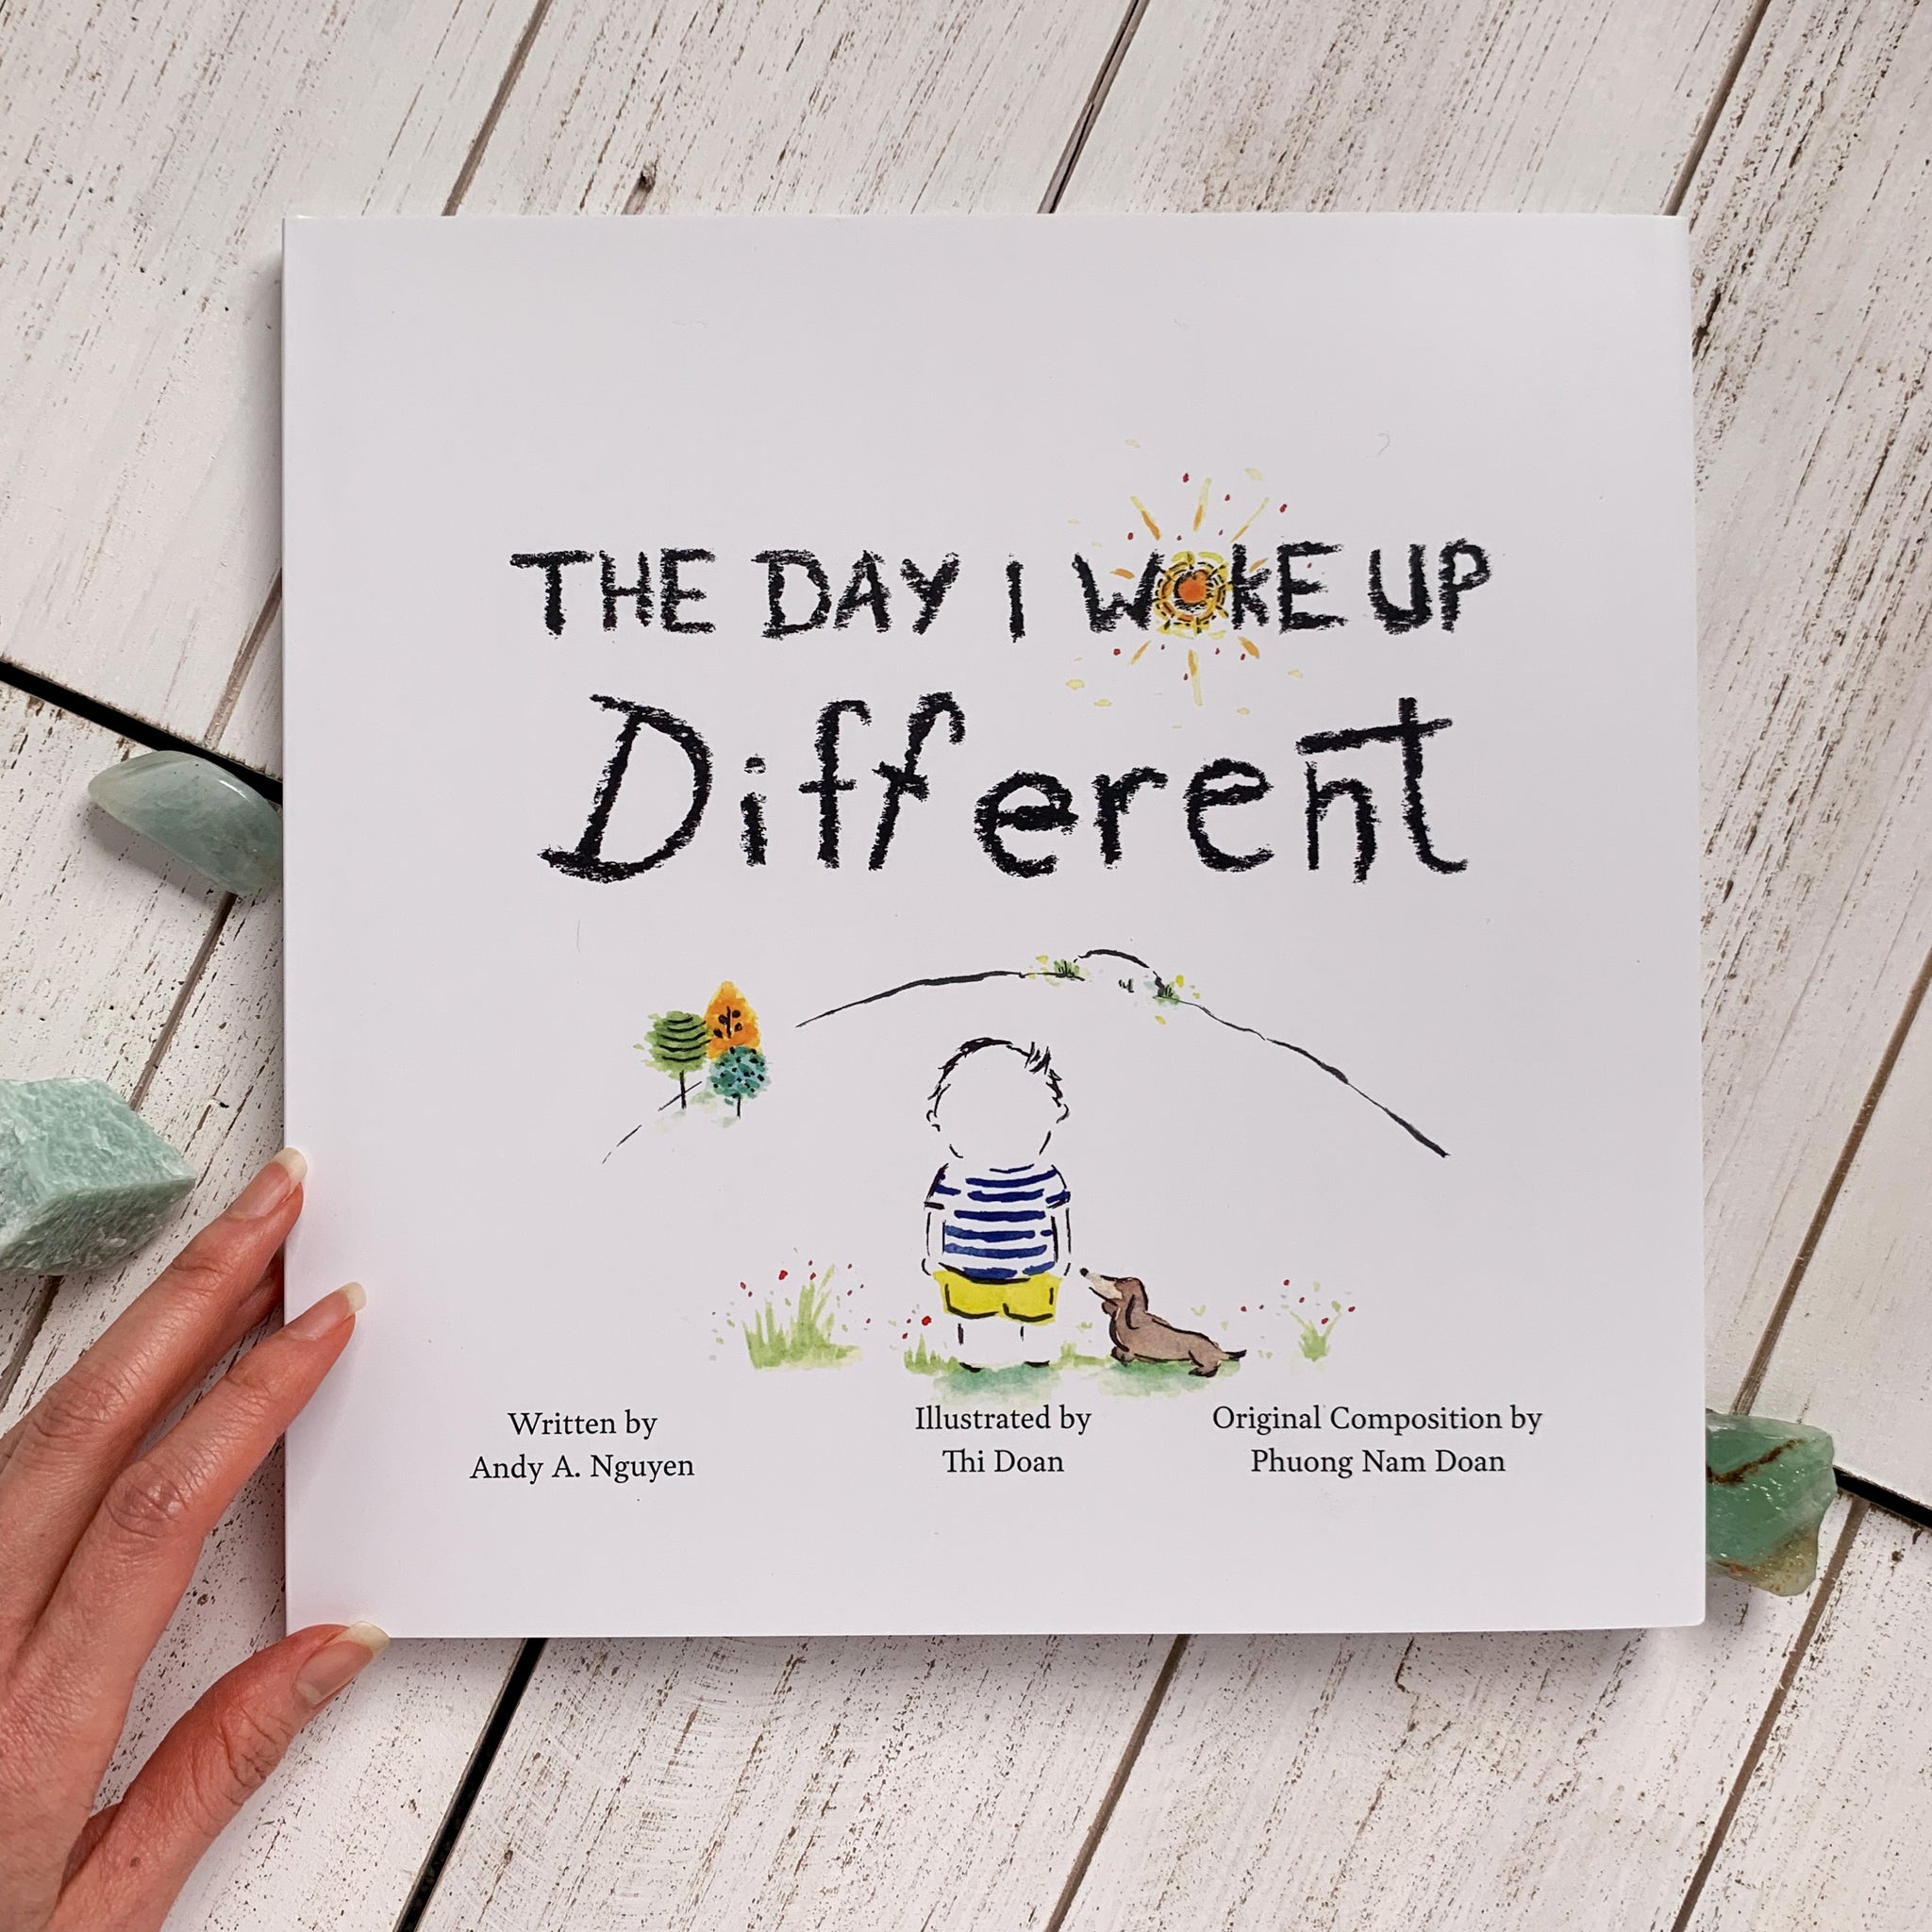 5 Secrets Behind the Art of "The Day I Woke Up Different" Book